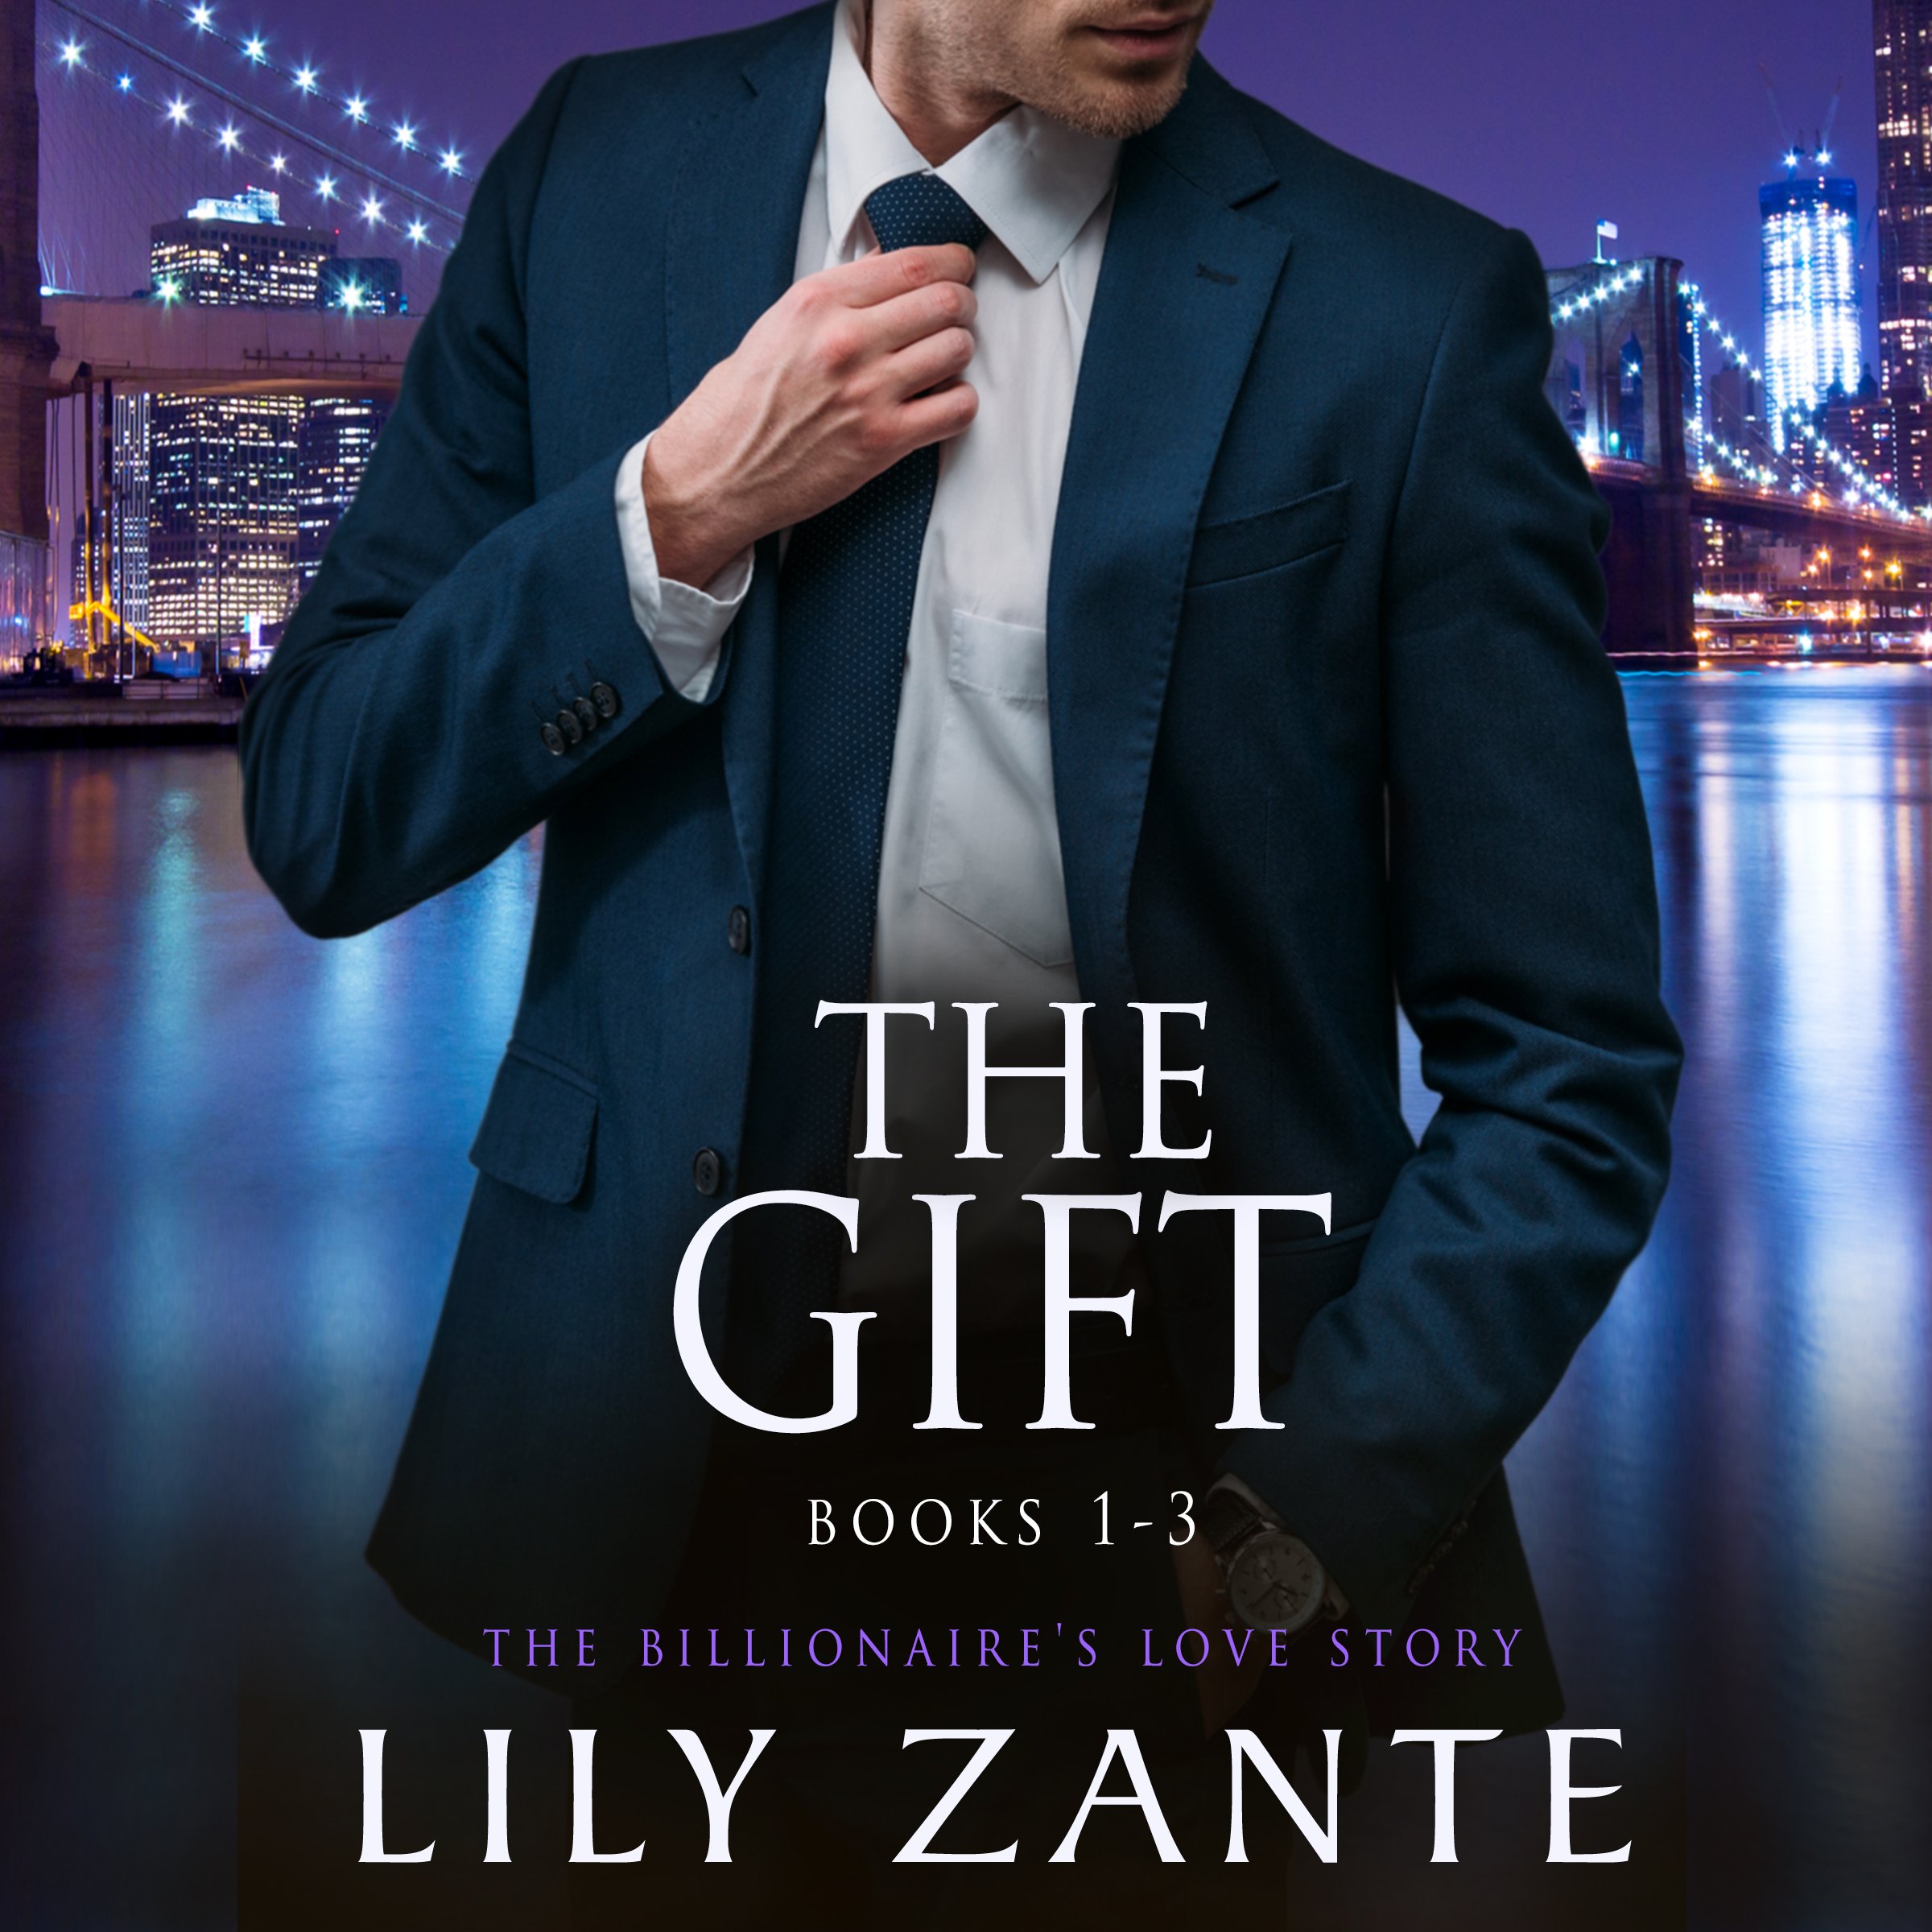 Audiobook Cover_Lily Zante_The Gift.jpg